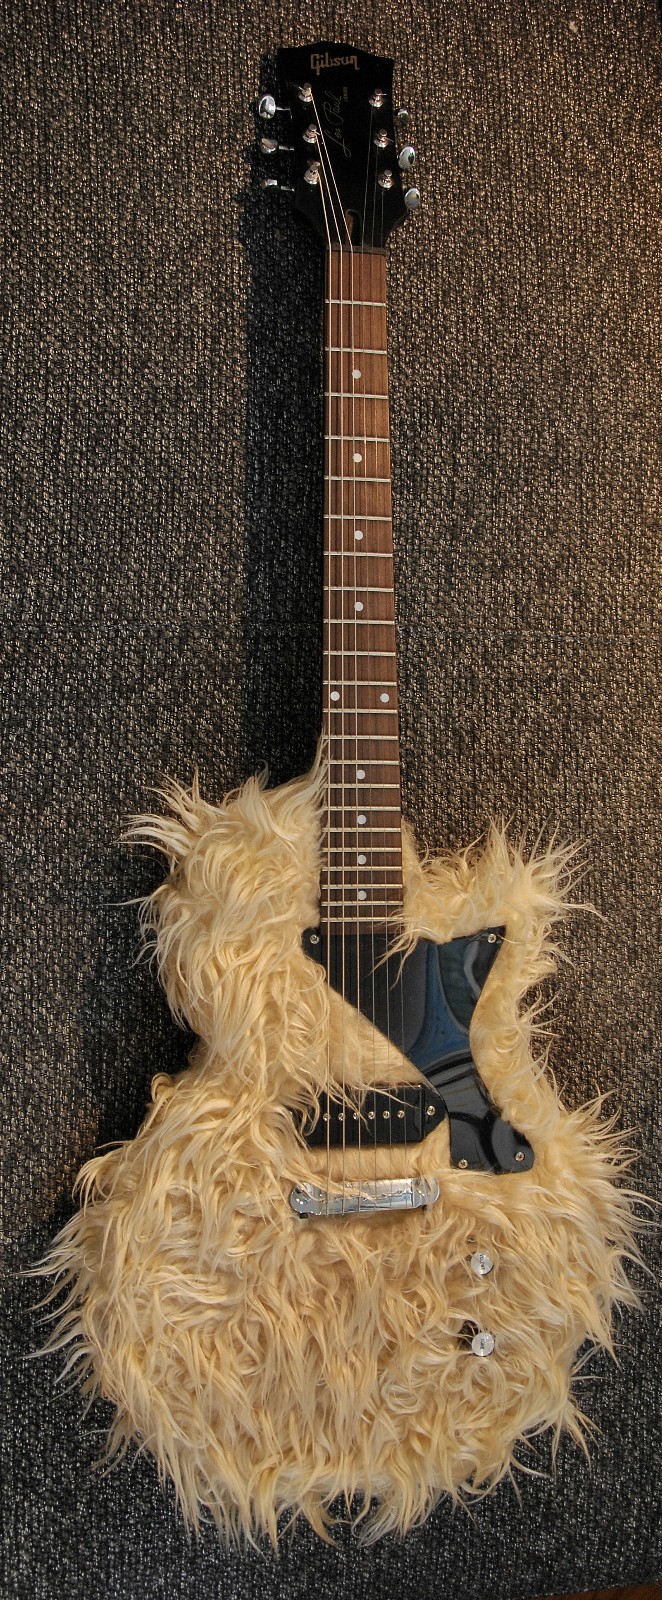 The Love Child of Chewbacca and a Guitar